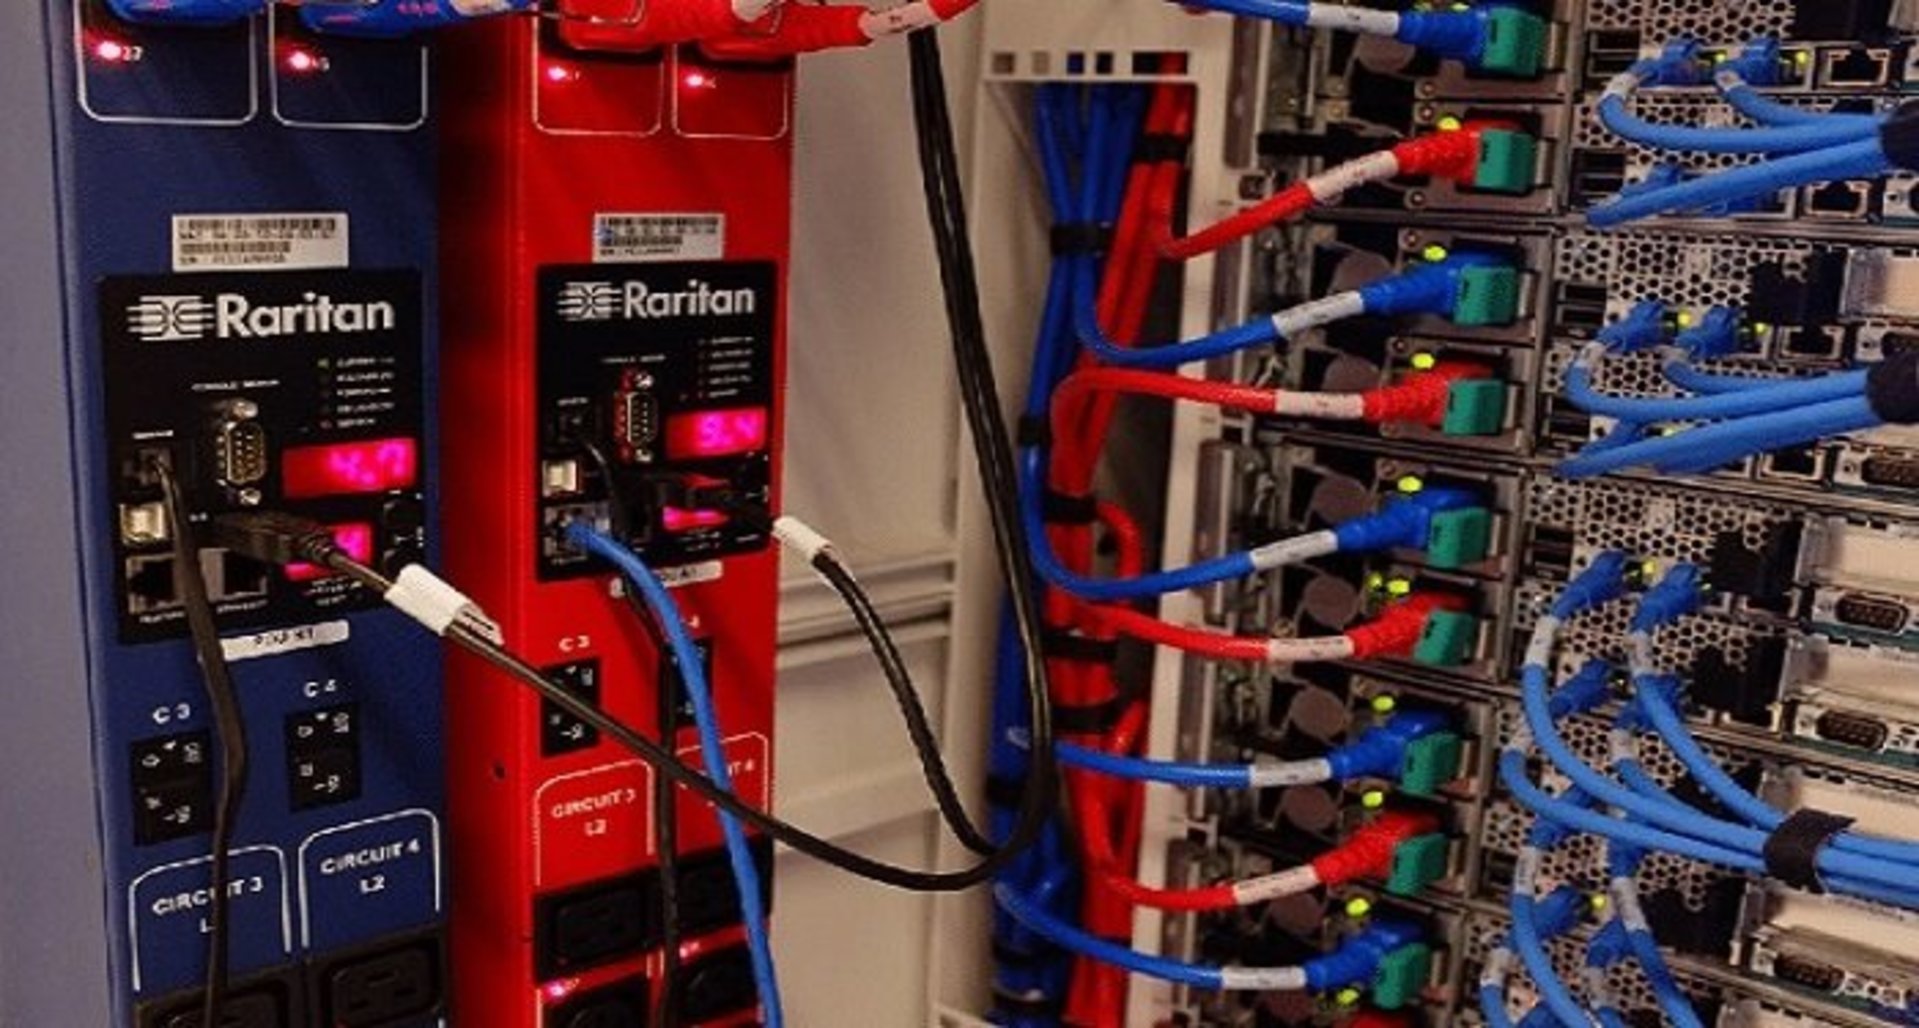 How Many Power Distribution Units (PDUs) Can Be Installed In A Server Rack?